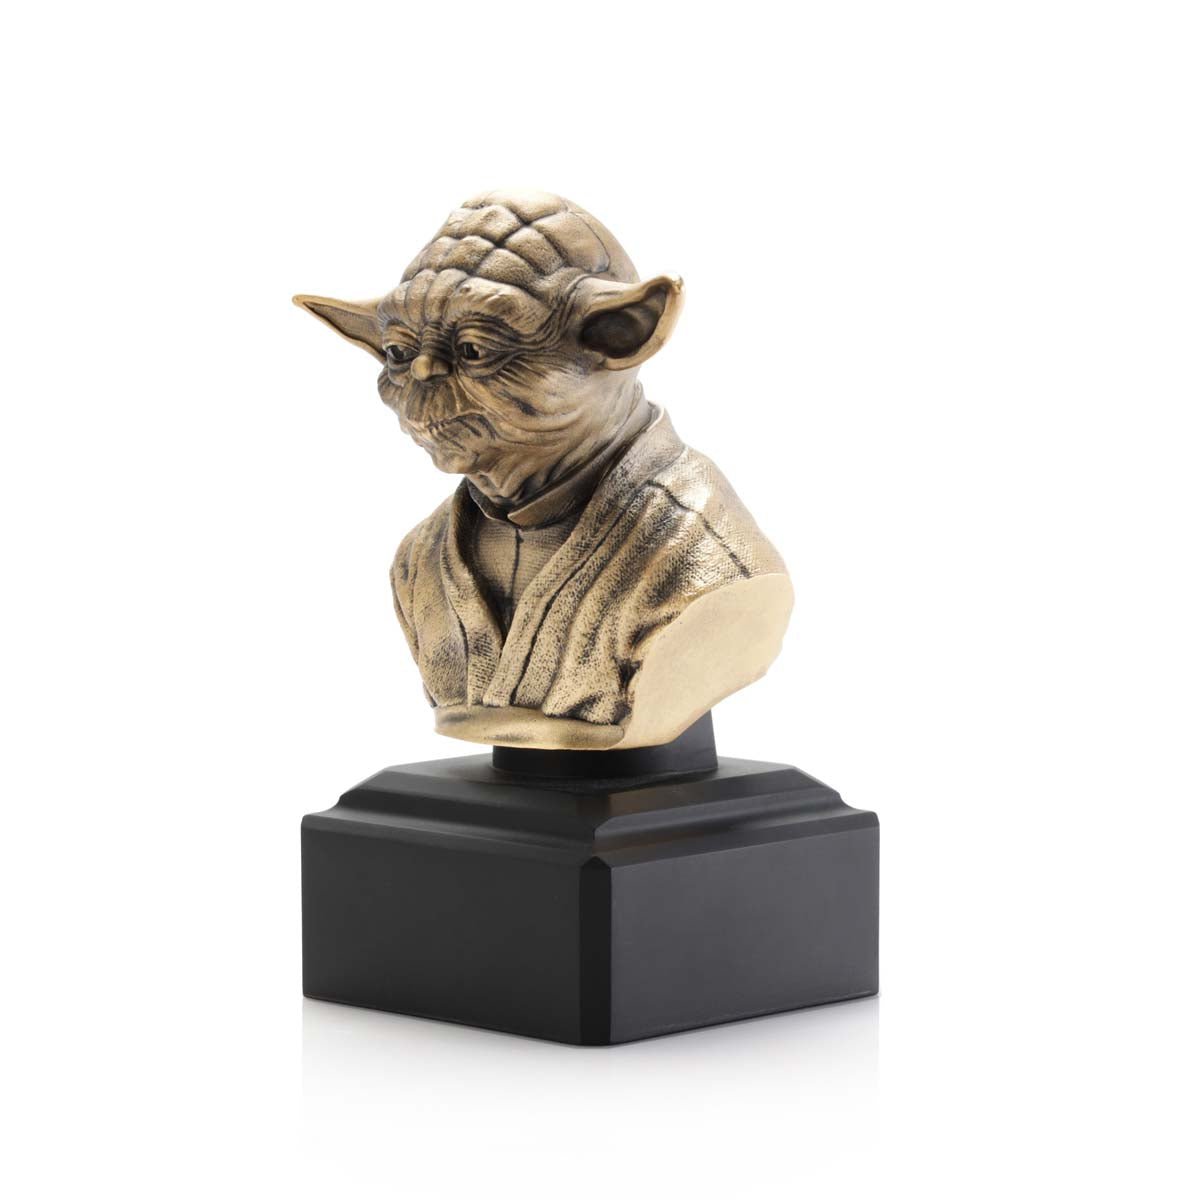 Yoda Limited Edition Bust - Star Wars Collectible Gift - RS Figures